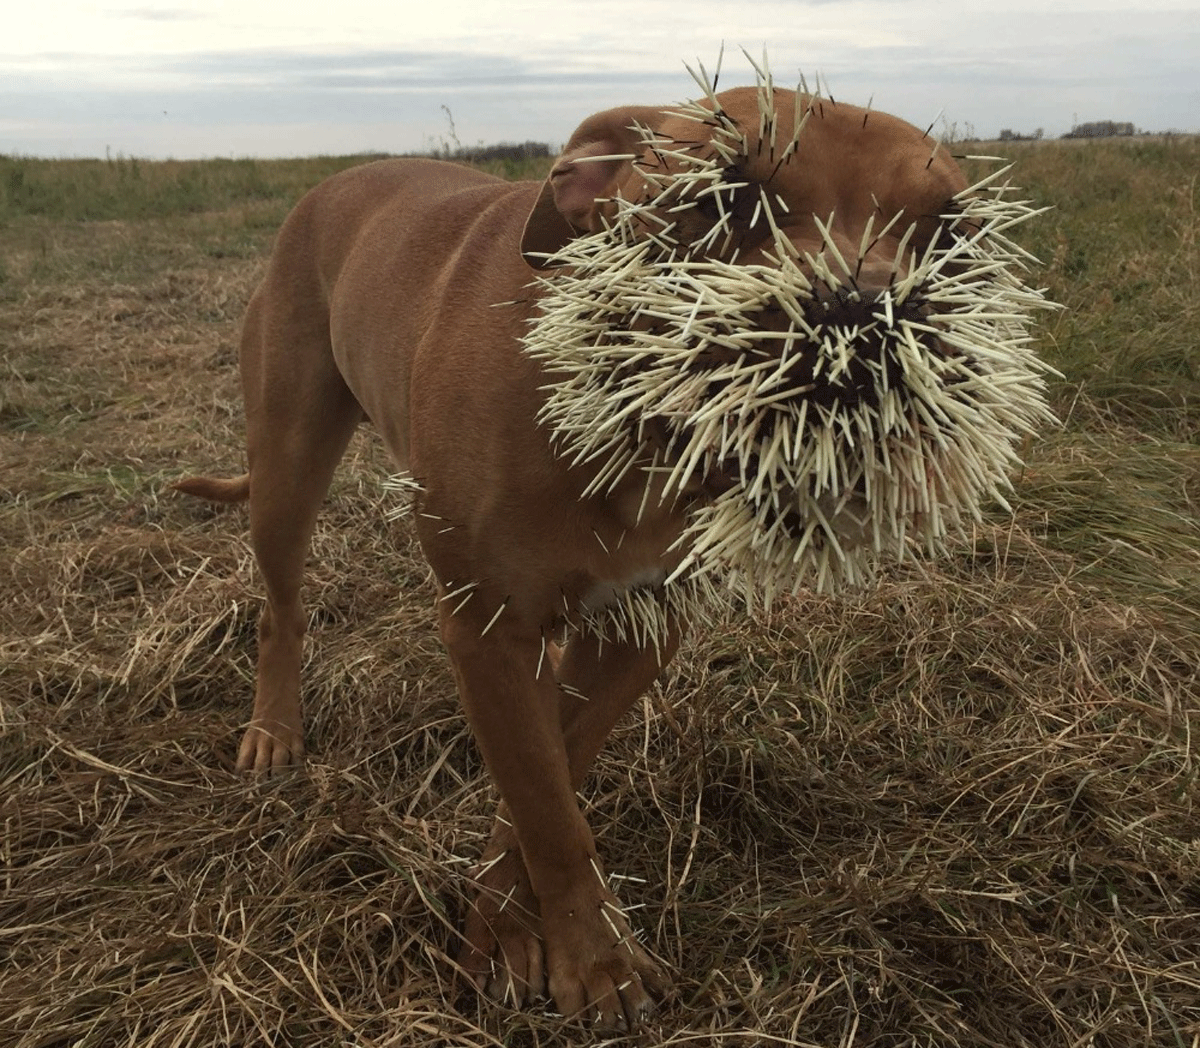 Over $15,200 raised for dogs covered with porcupine quills